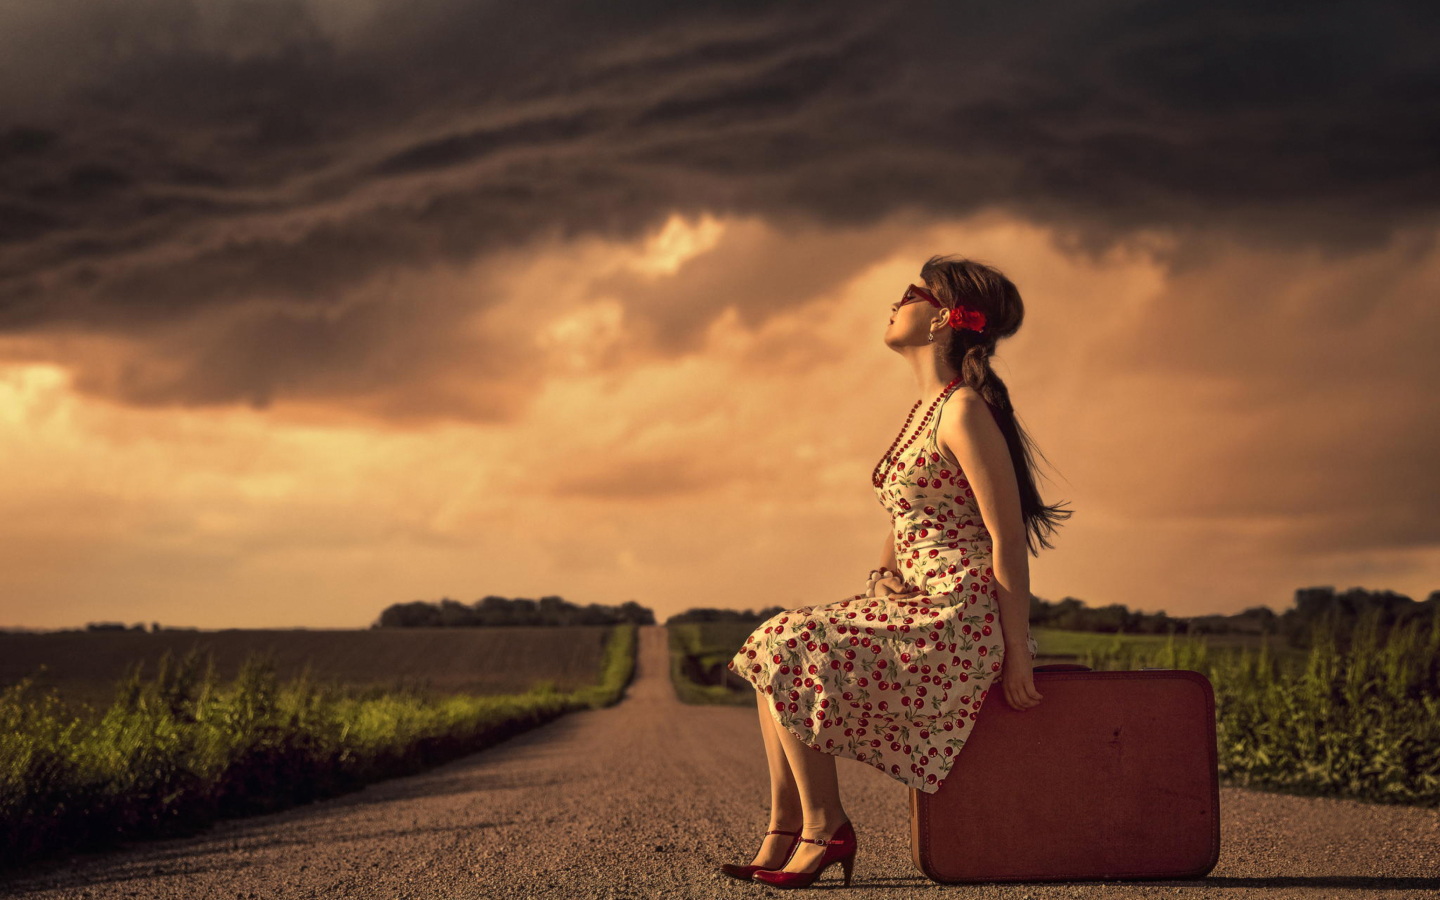 Girl Sitting On Luggage On Road wallpaper 1440x900